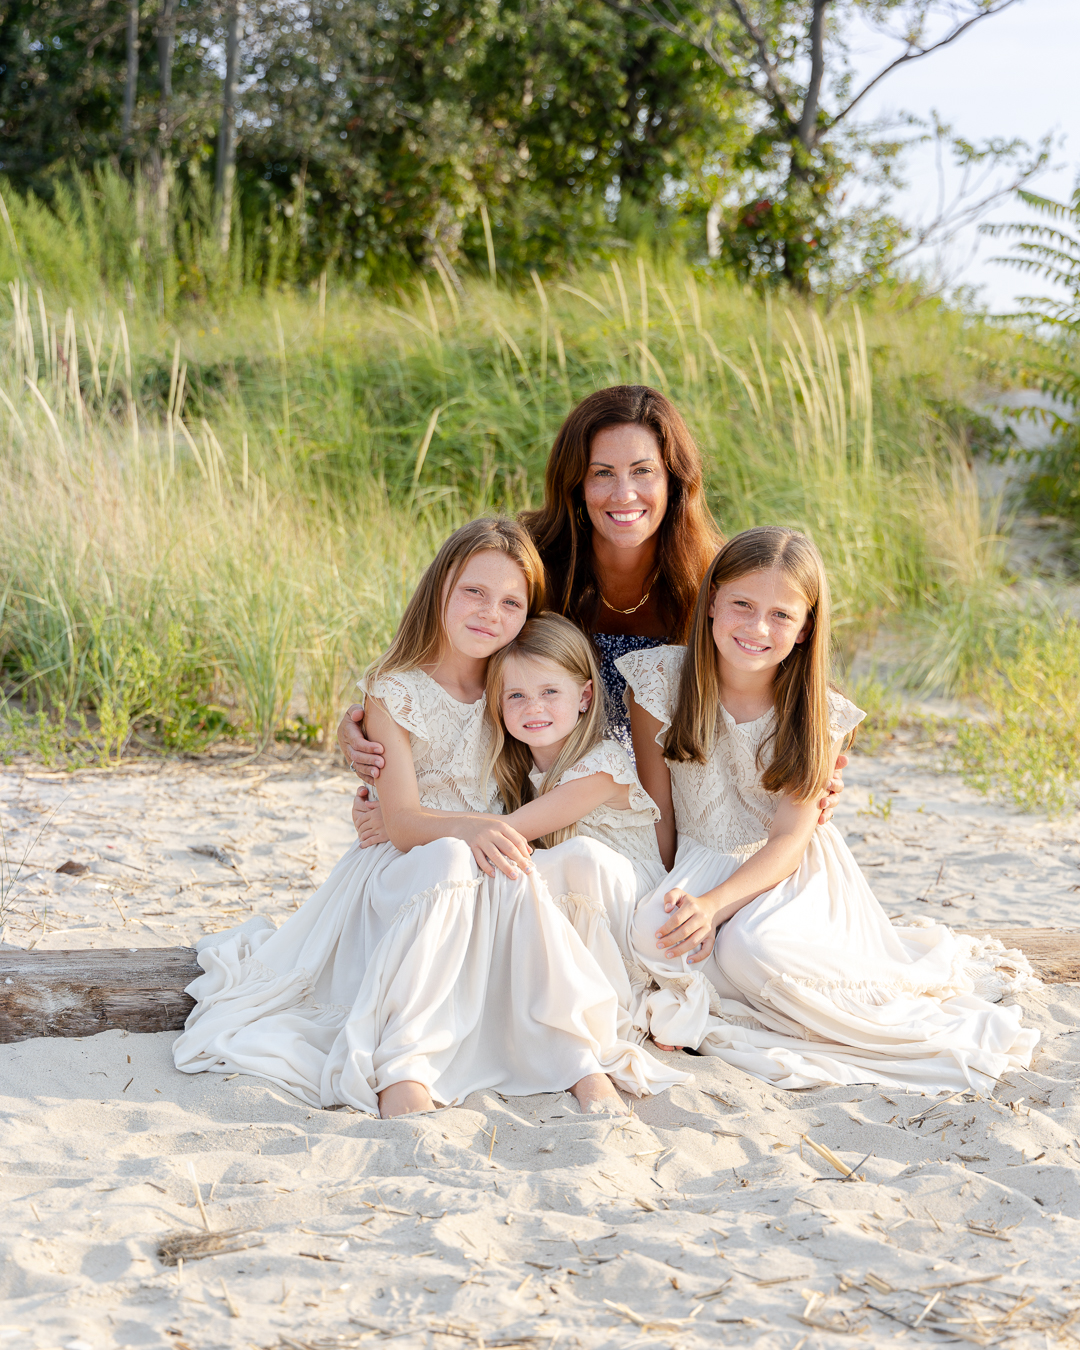 mother and 3 children on the beach at golden hour family portrait